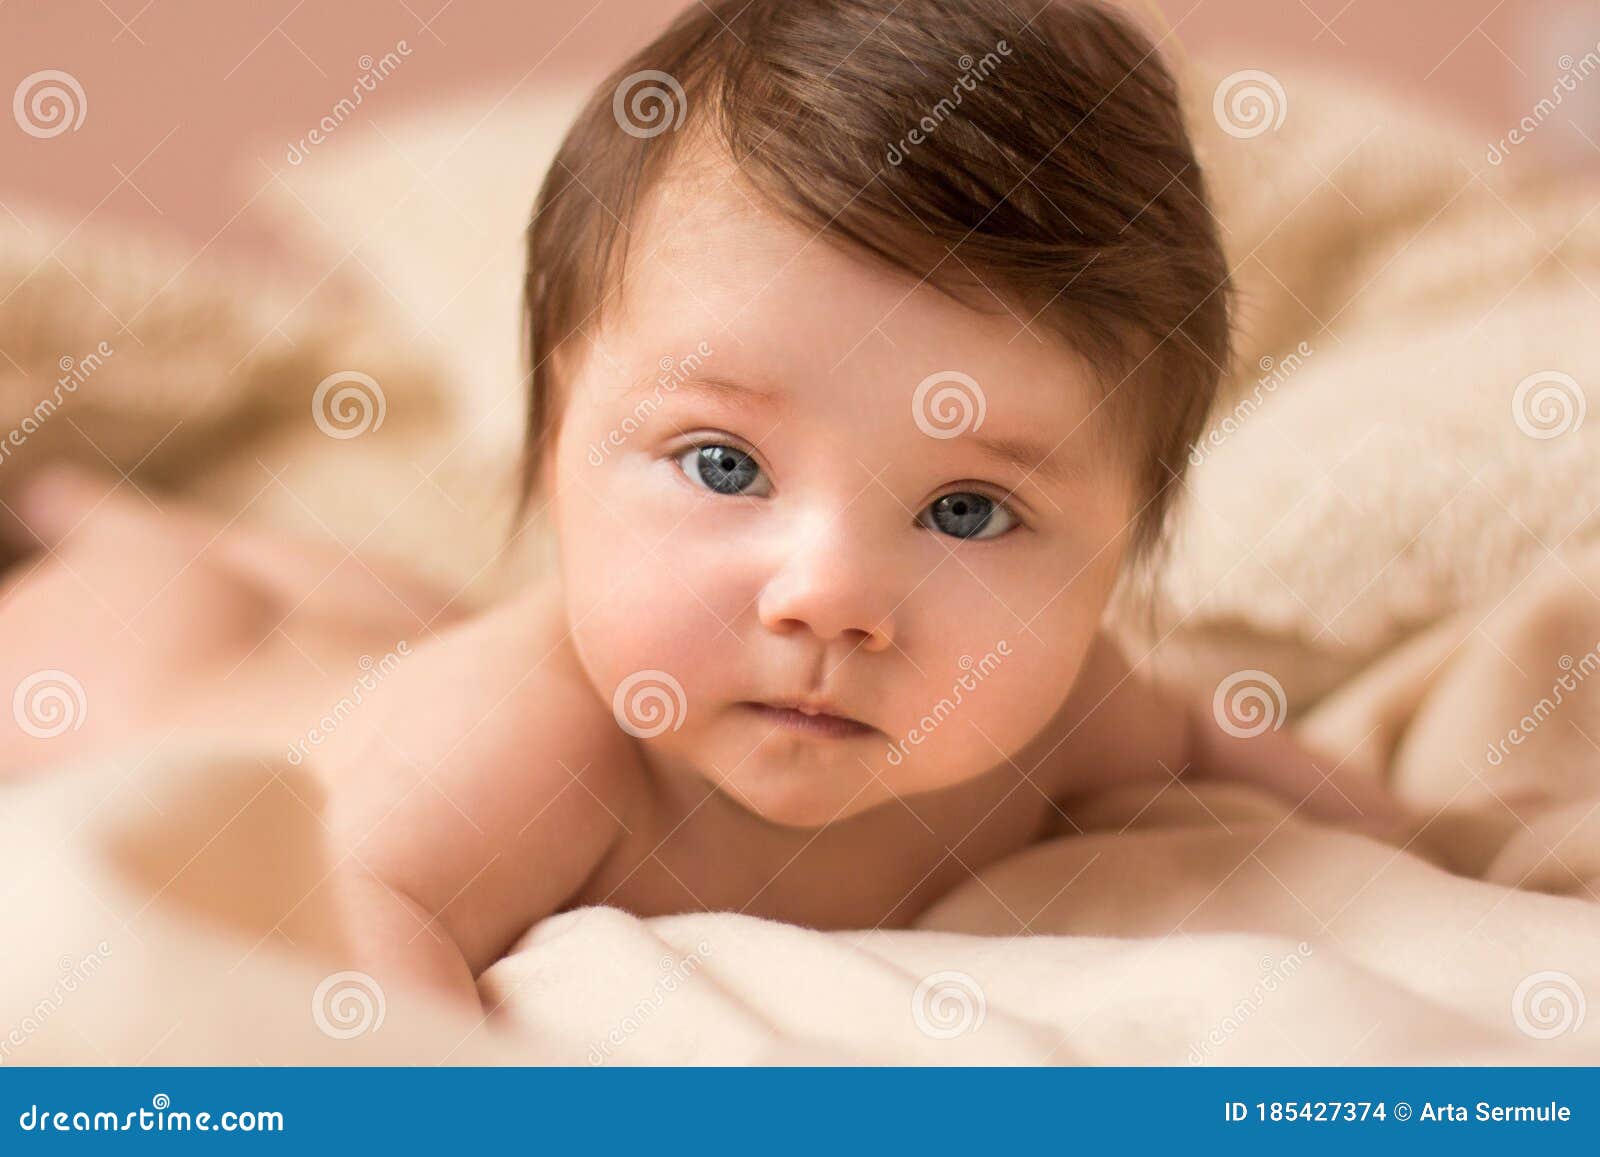 Portrait of Adorable Smiling Newborn Baby with Thick Brown Hair . Newborn  Child Relaxing in Bed Stock Photo - Image of happy, child: 185427374